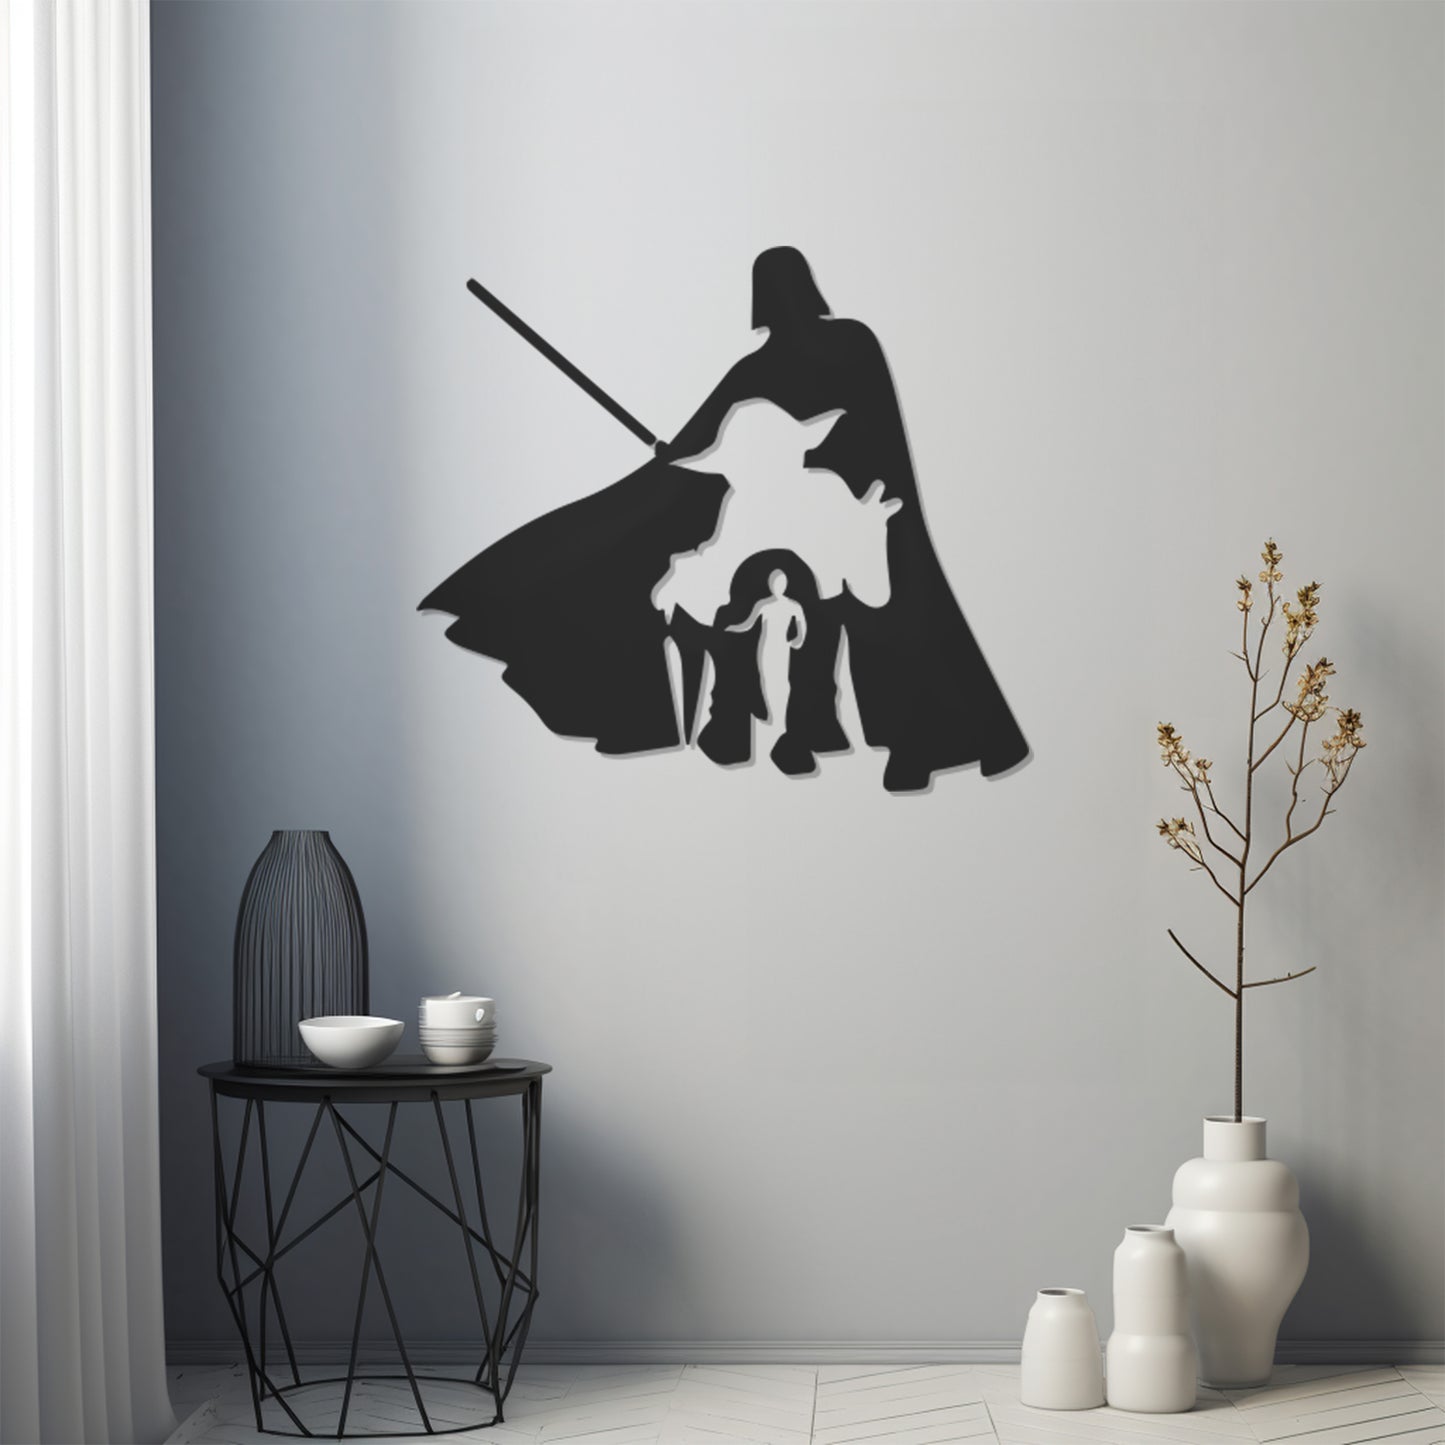 Silhouette Of Star Wars Characters Metal Wall Art Decor